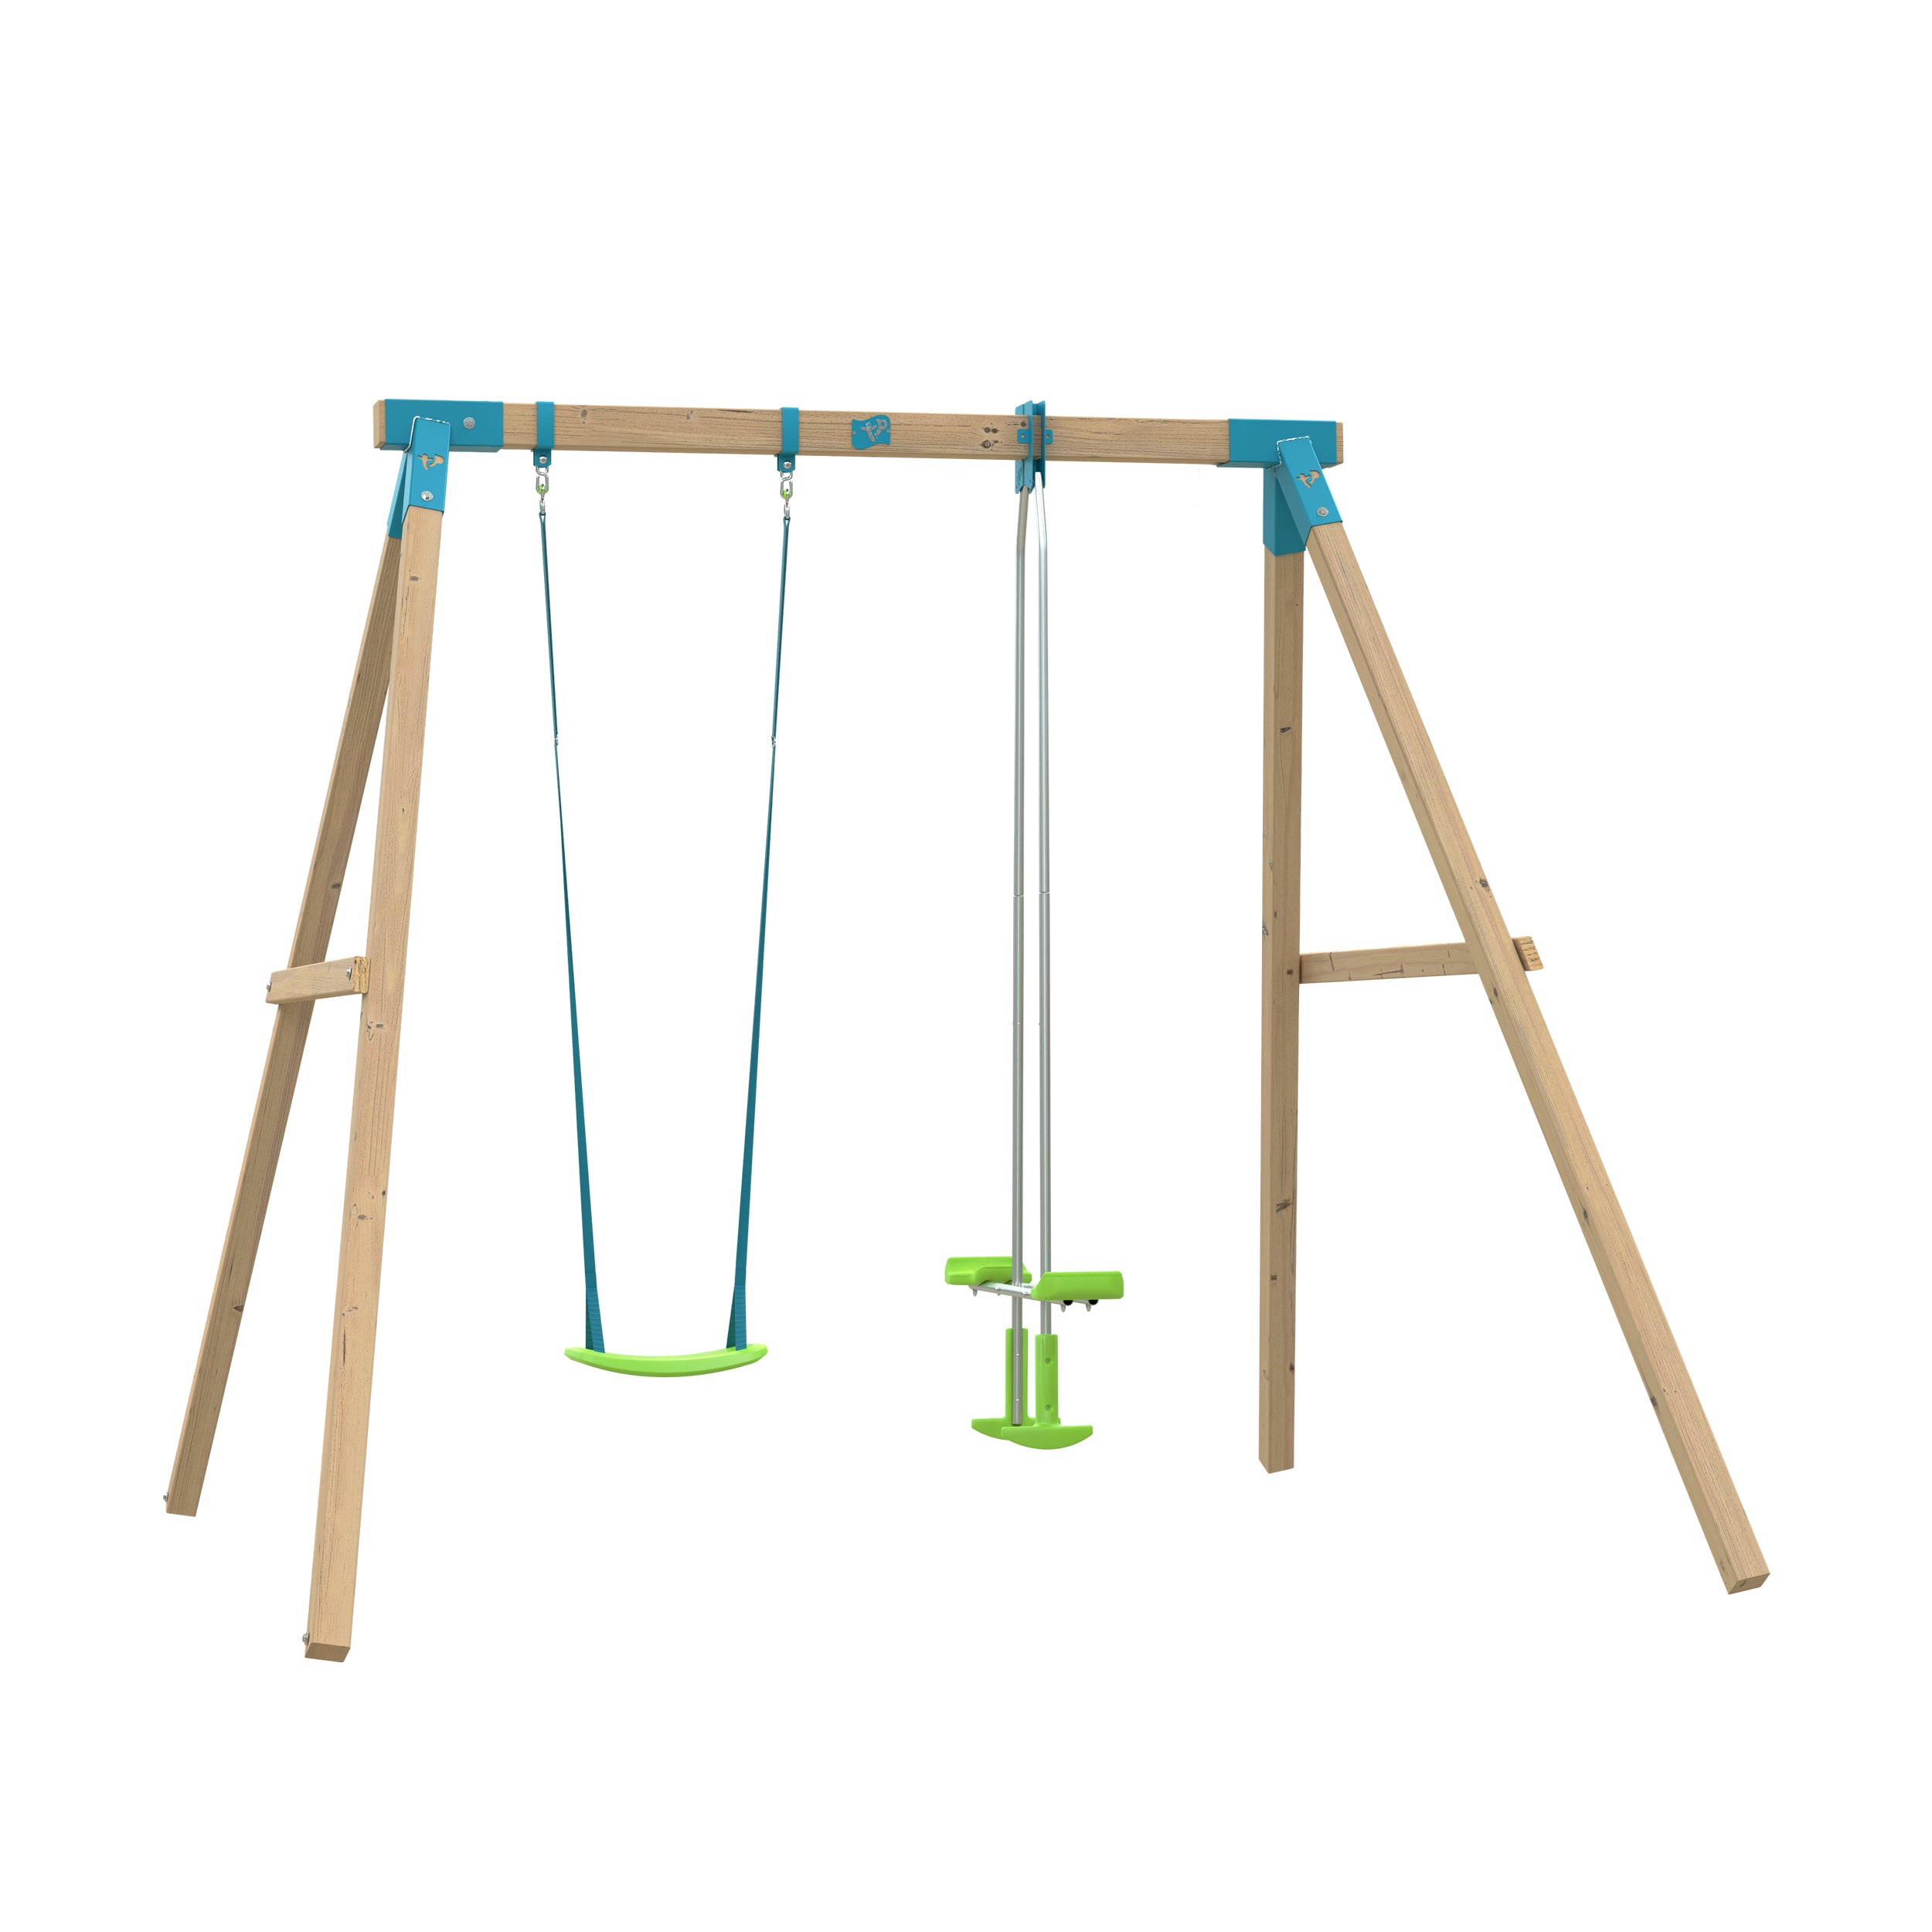 TP Kingswood Double Swing Squarewood Set with Glider - FSC<sup>®</sup> certified